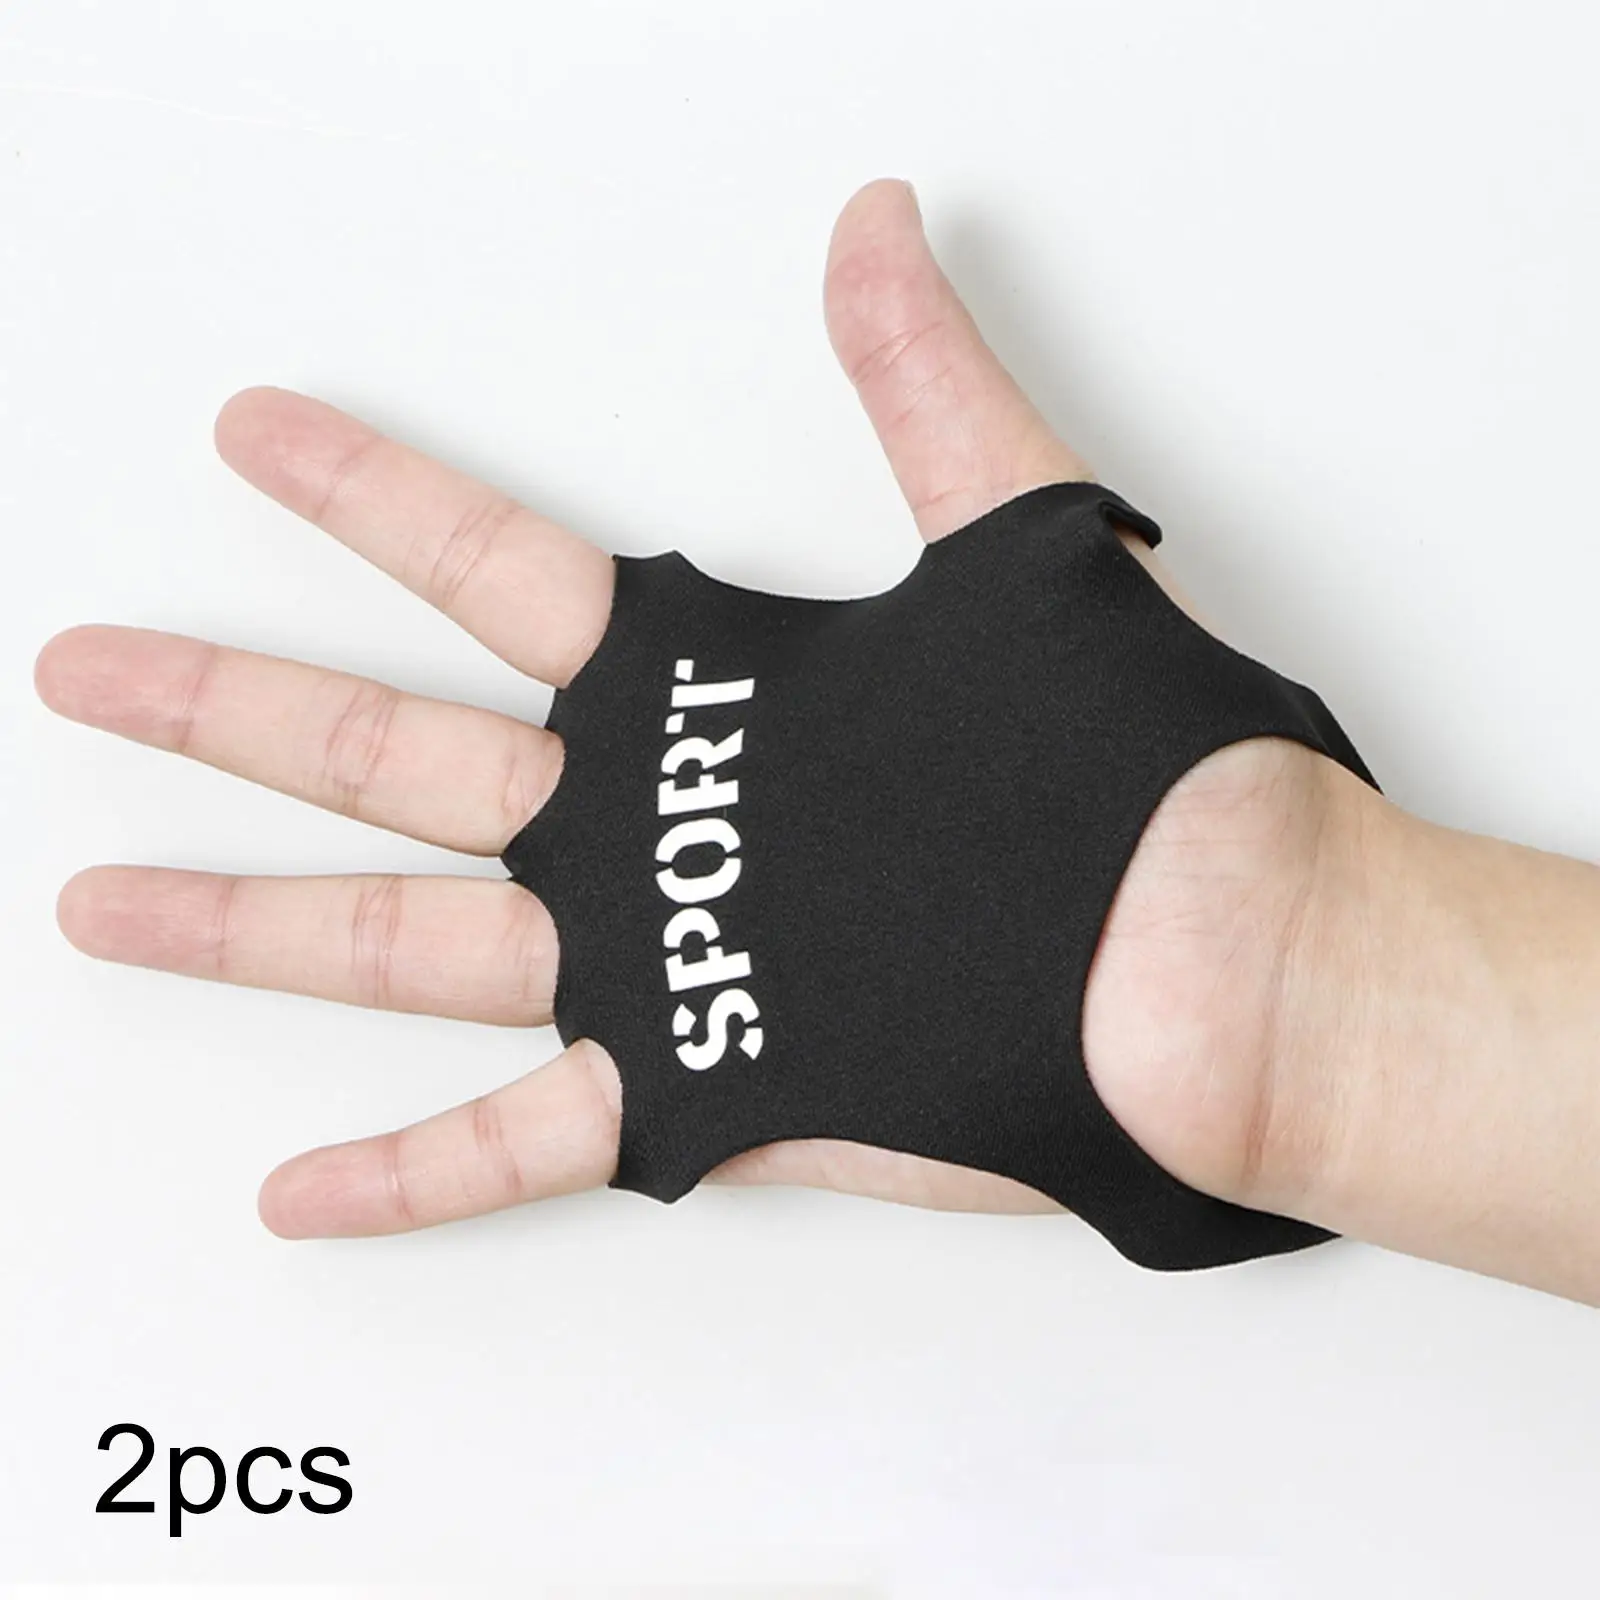 Workout Gloves Pads Glove Hand Grips Durable Weightlifting Grip Pads for Men Women Yoga Grips Pull Ups Strength Training